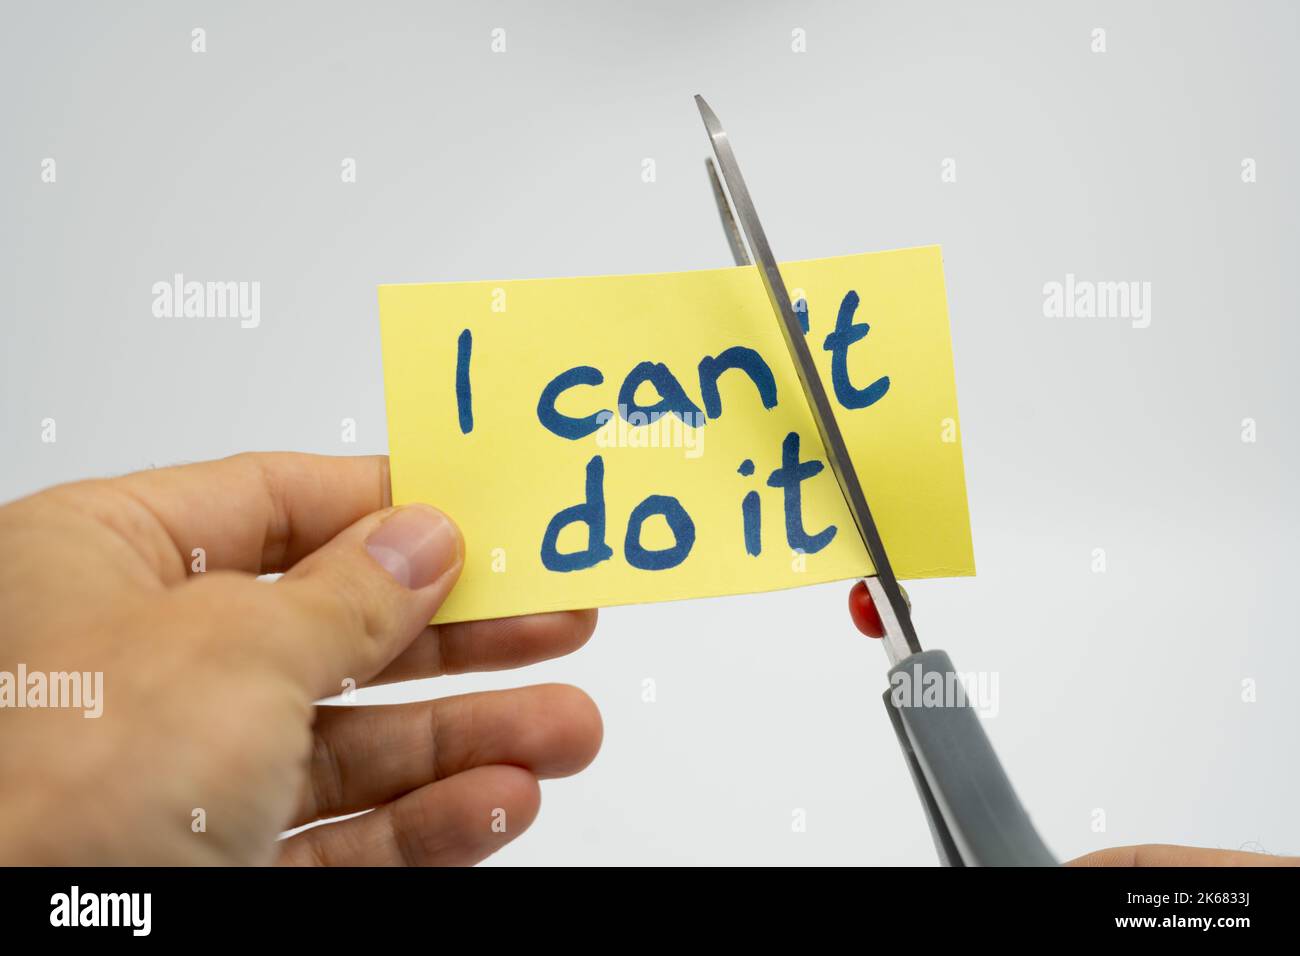 Concept for turning can't to can - motivate and encourage yourself Stock Photo